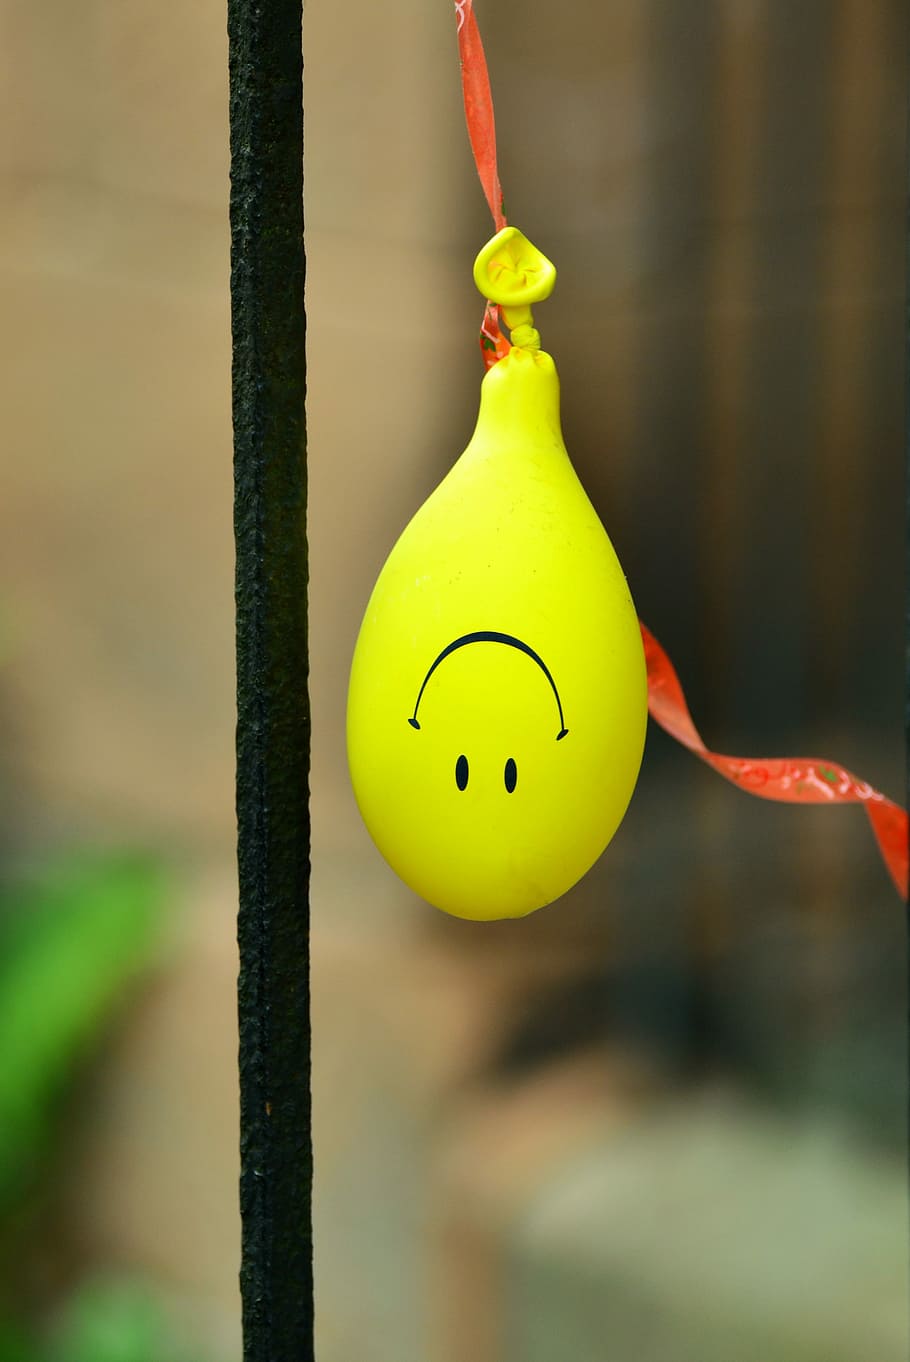 yellow balloon with smiley emoticon print hanging beside black steel rod, HD wallpaper